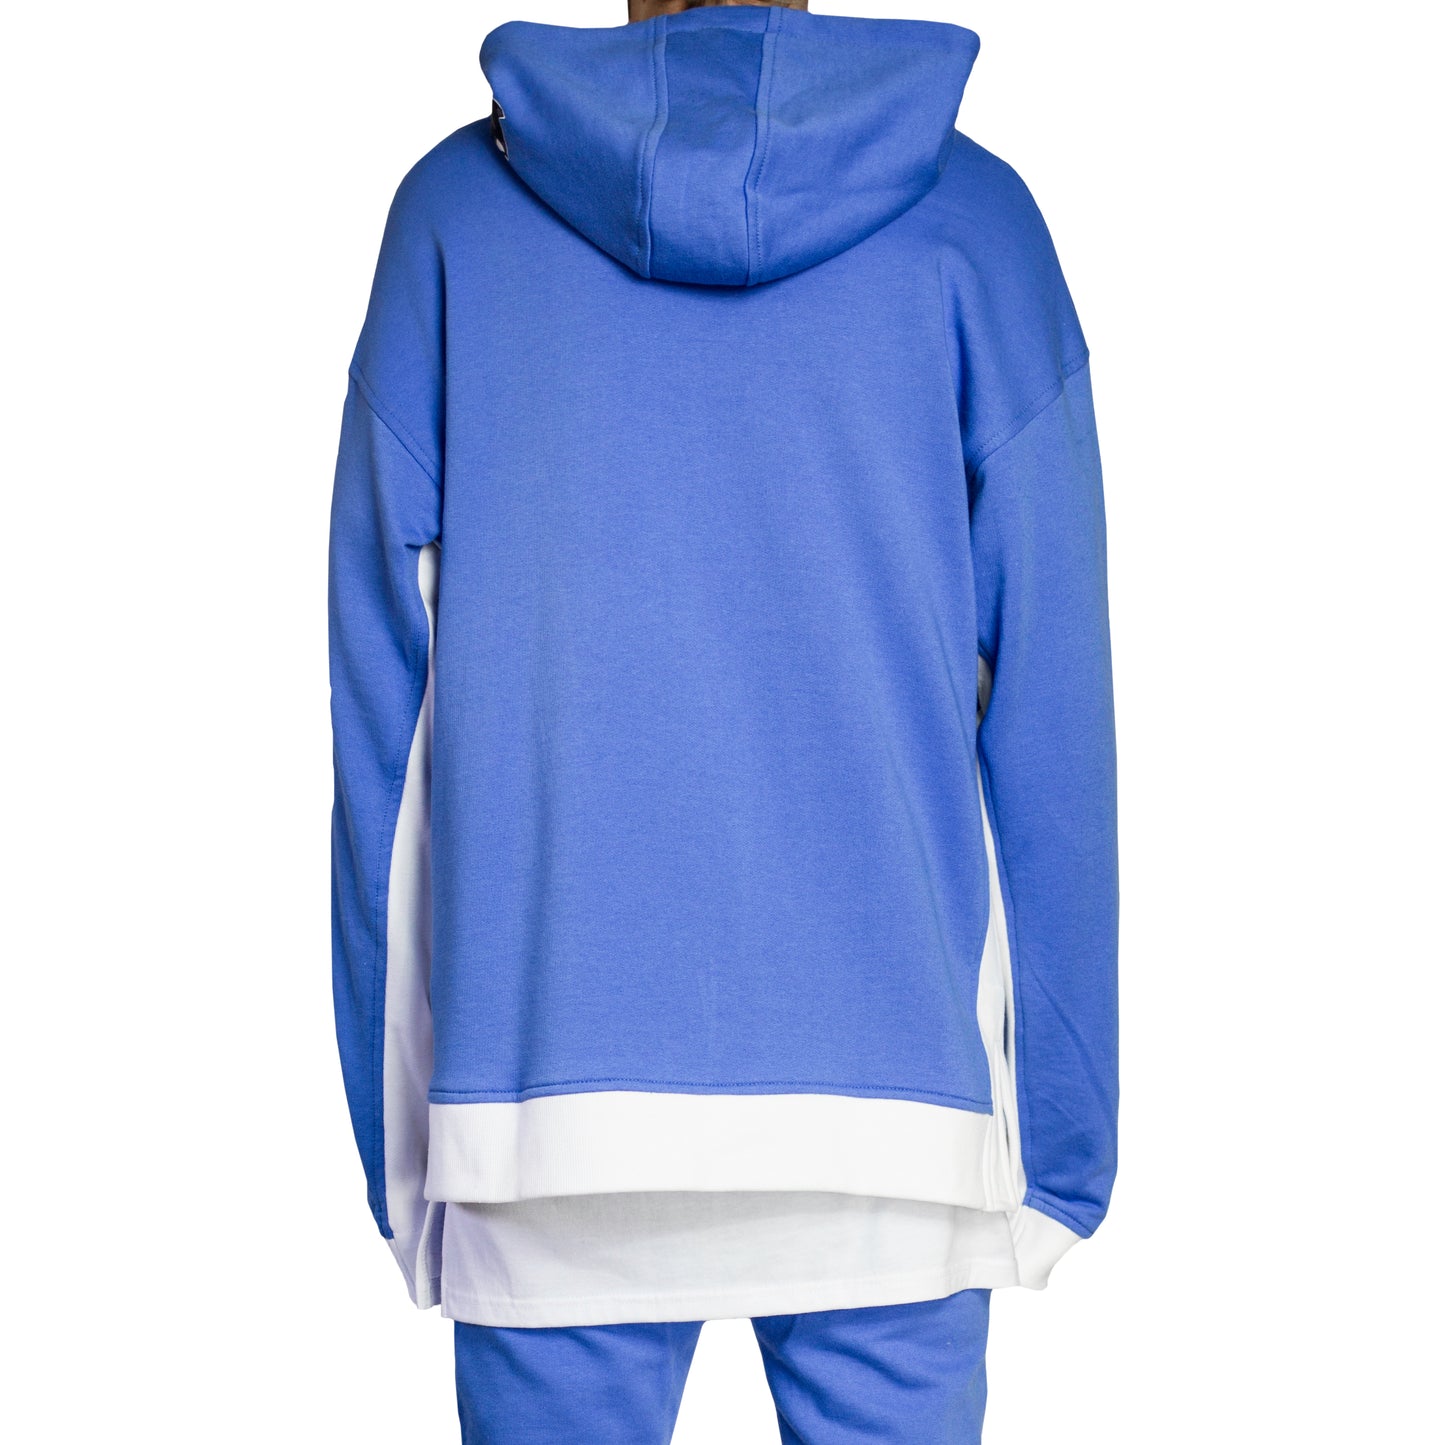 Panther Hoody : Turquoise/White